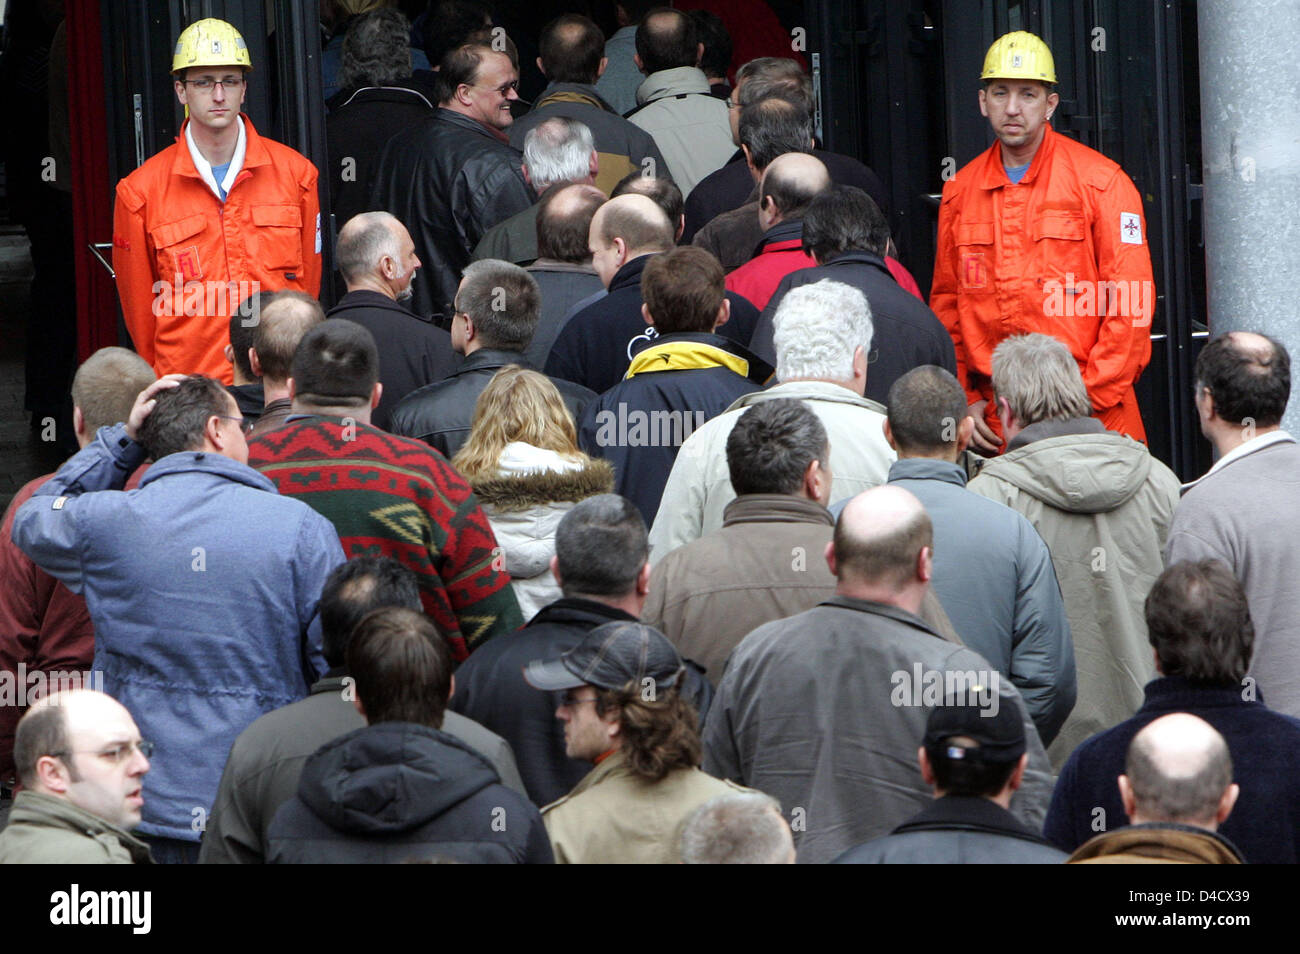 Employees and miners of 'RAG Deutsche Steinkohle' mining company arrive at the company's extraordinary works meeting in Saarbruecken, Germany, 26 February 2008. A mining related earthquake reaching 4,0 on the 'Richter' scale shook the Saar region on 23 February 2008. Since then work rests at the Saarland's only remaining mine in Ensdorf. 3600 miners are on leave and will be sent on Stock Photo